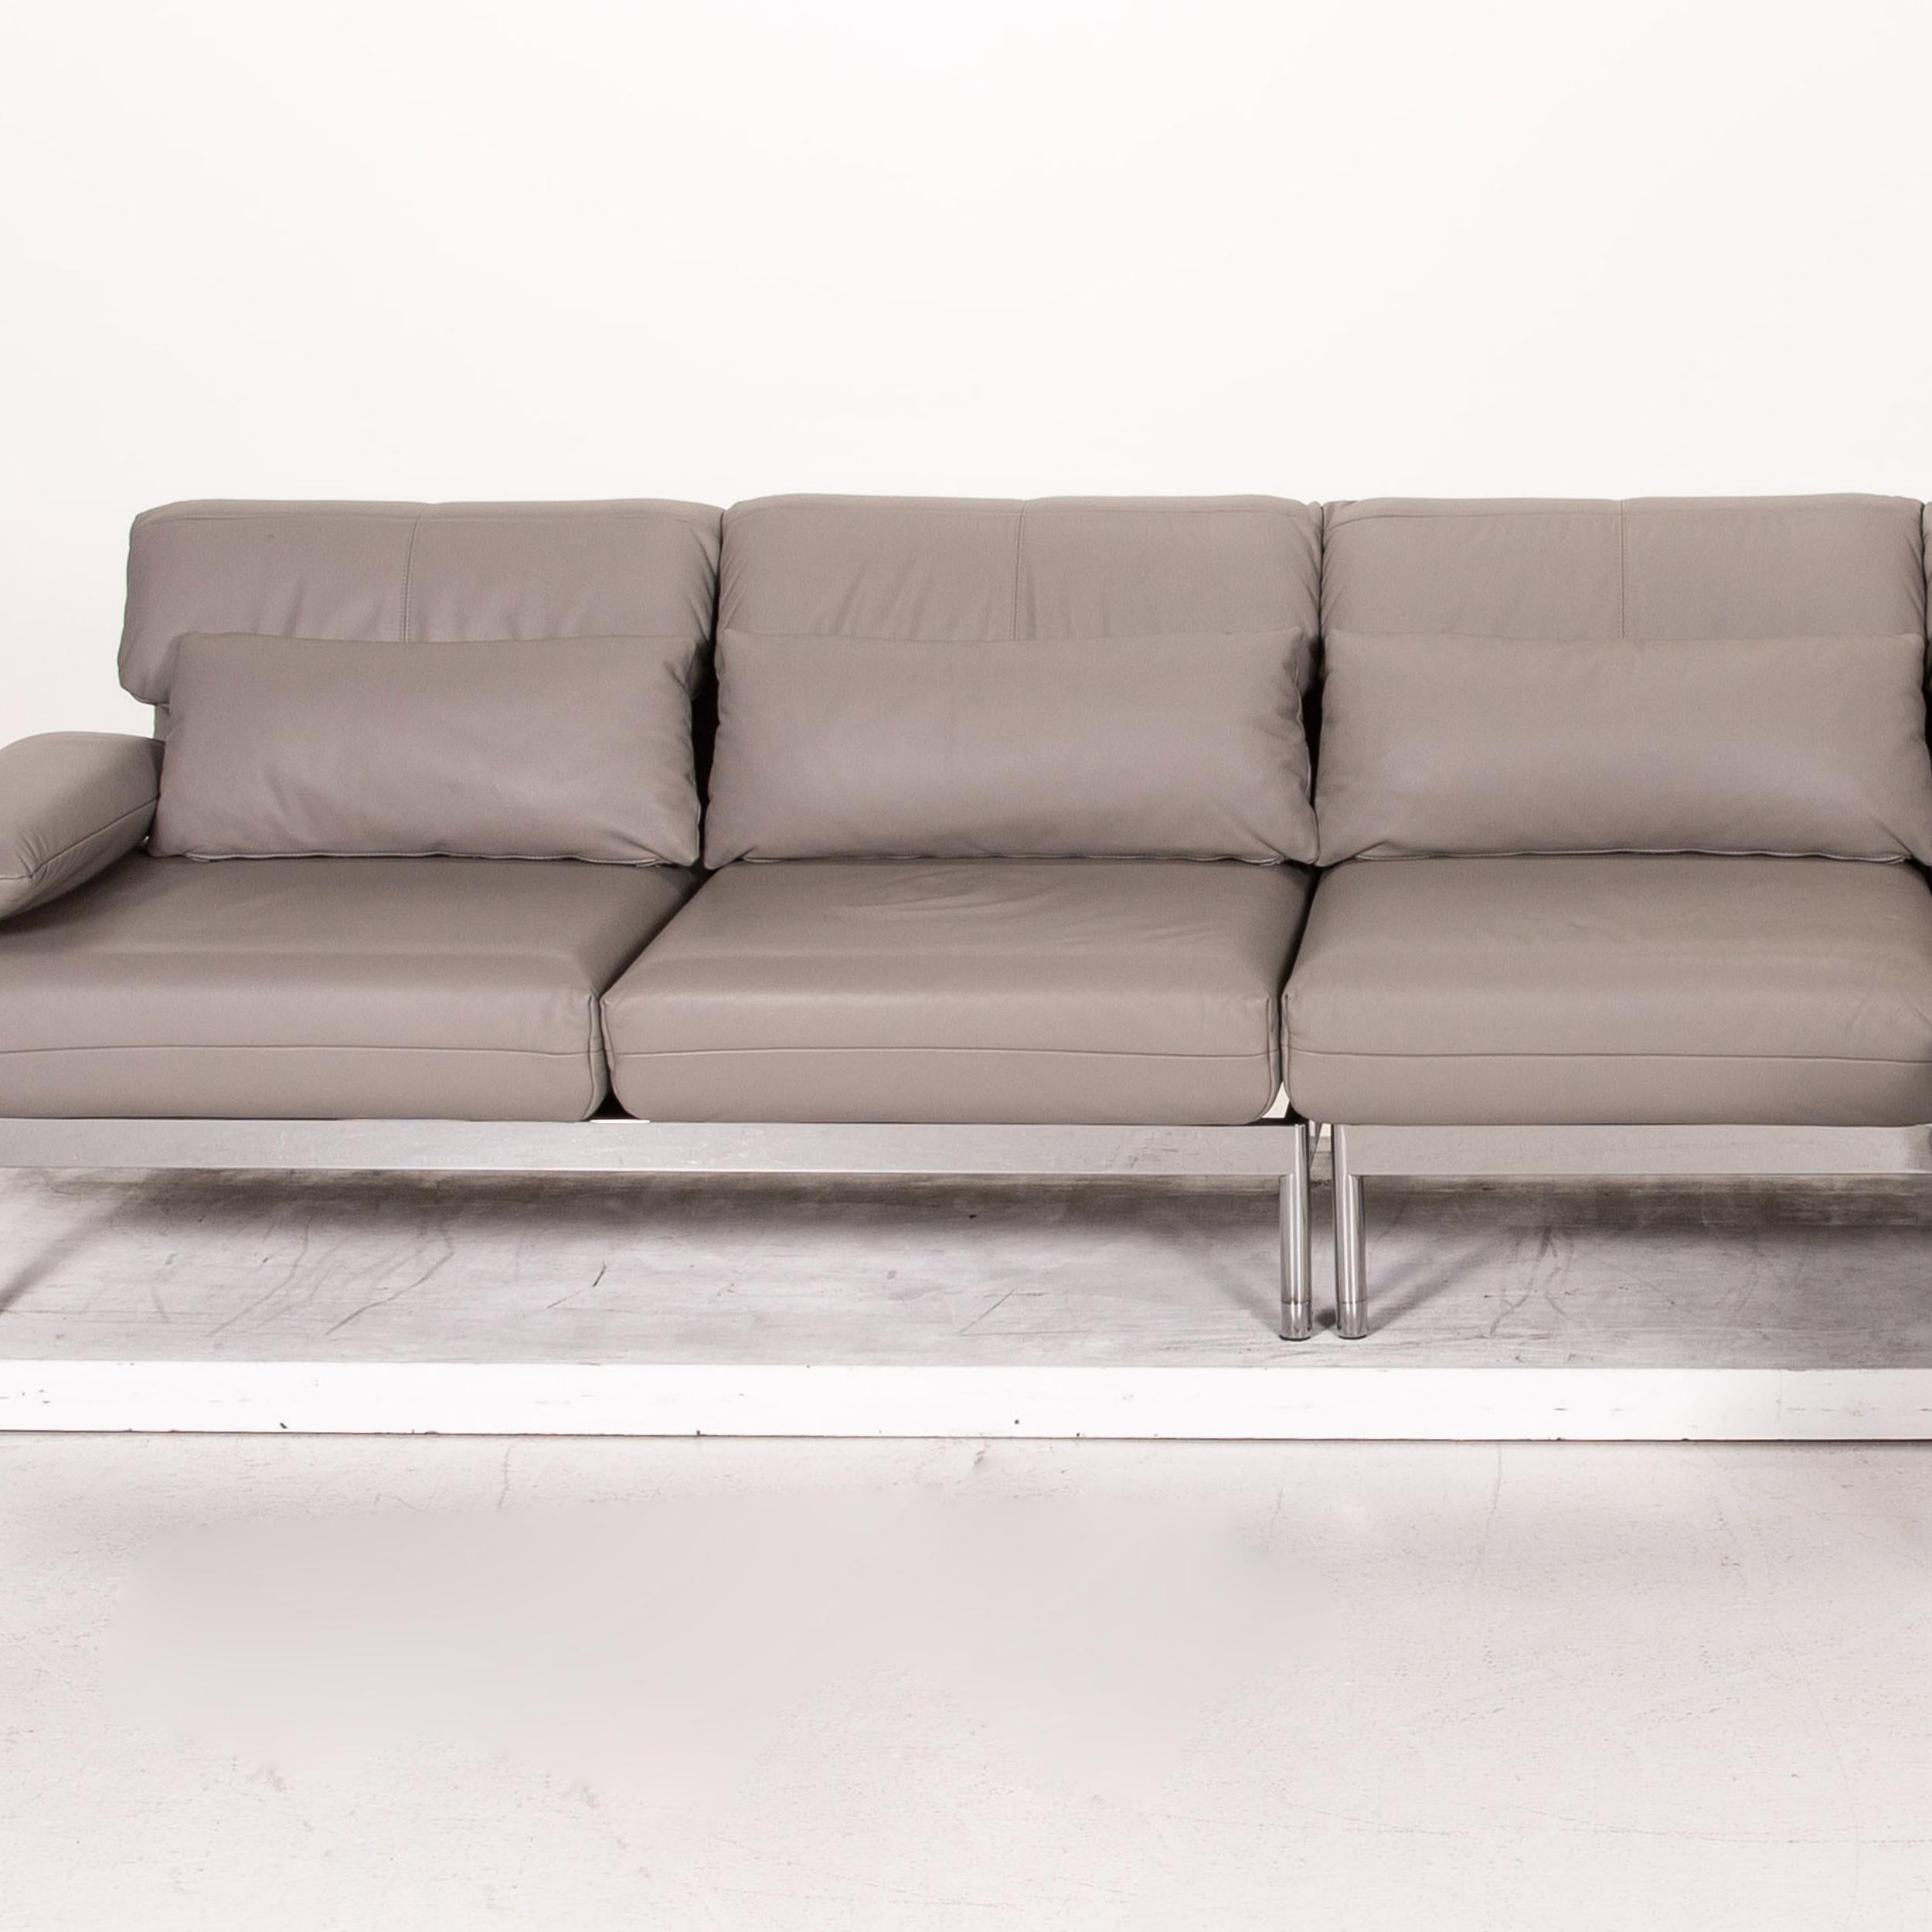 Rolf Benz Plura Leather Corner Sofa Gray Sofa Function Relax Function Couch 4